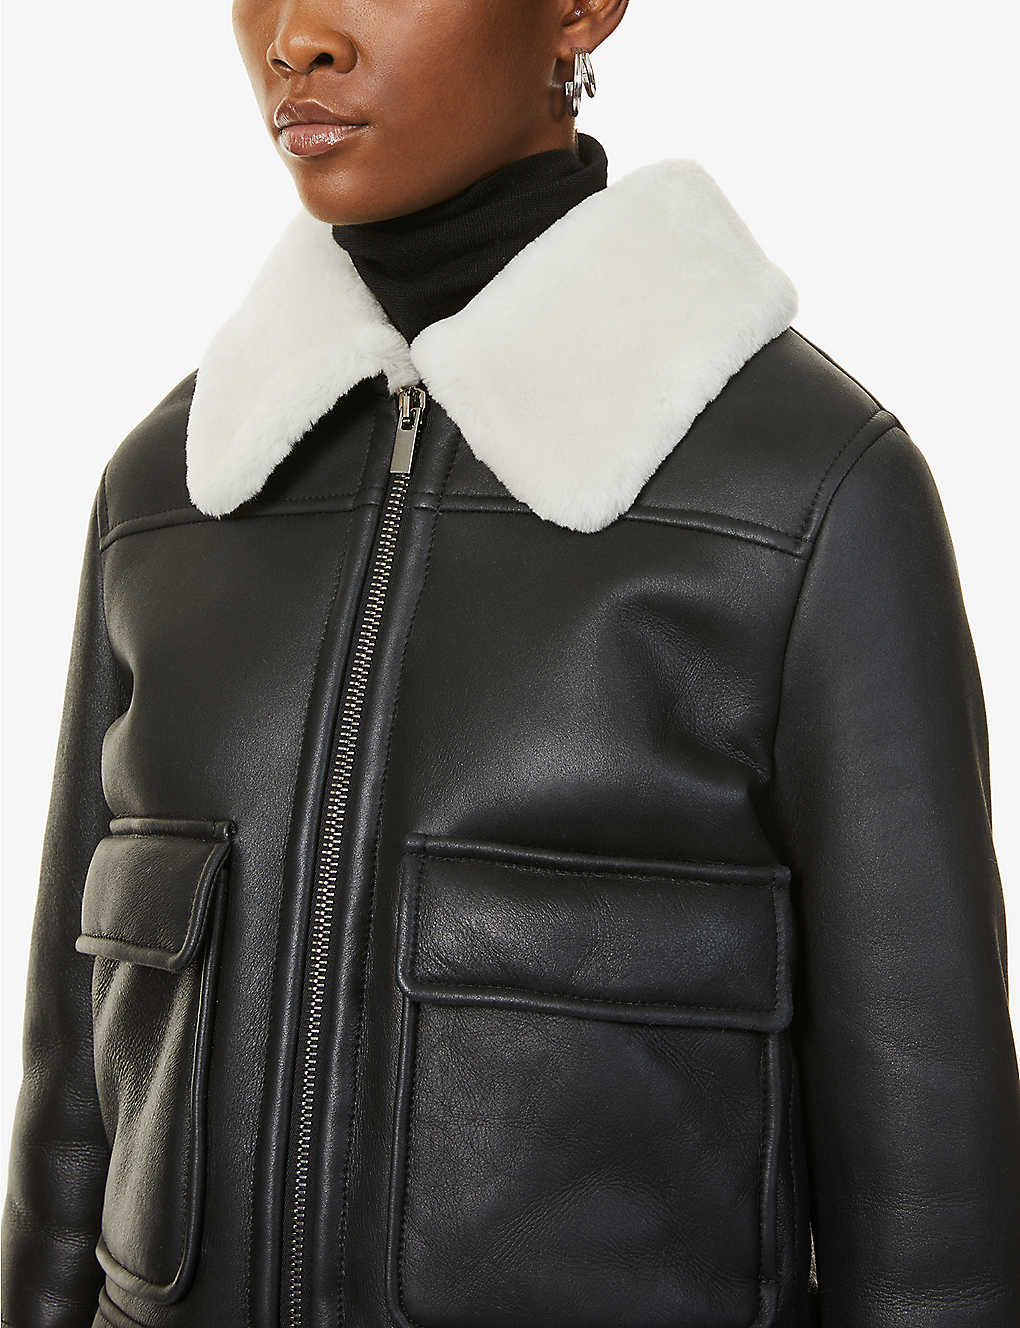 Women’s Black Leather White Shearling Big Collared Jacket